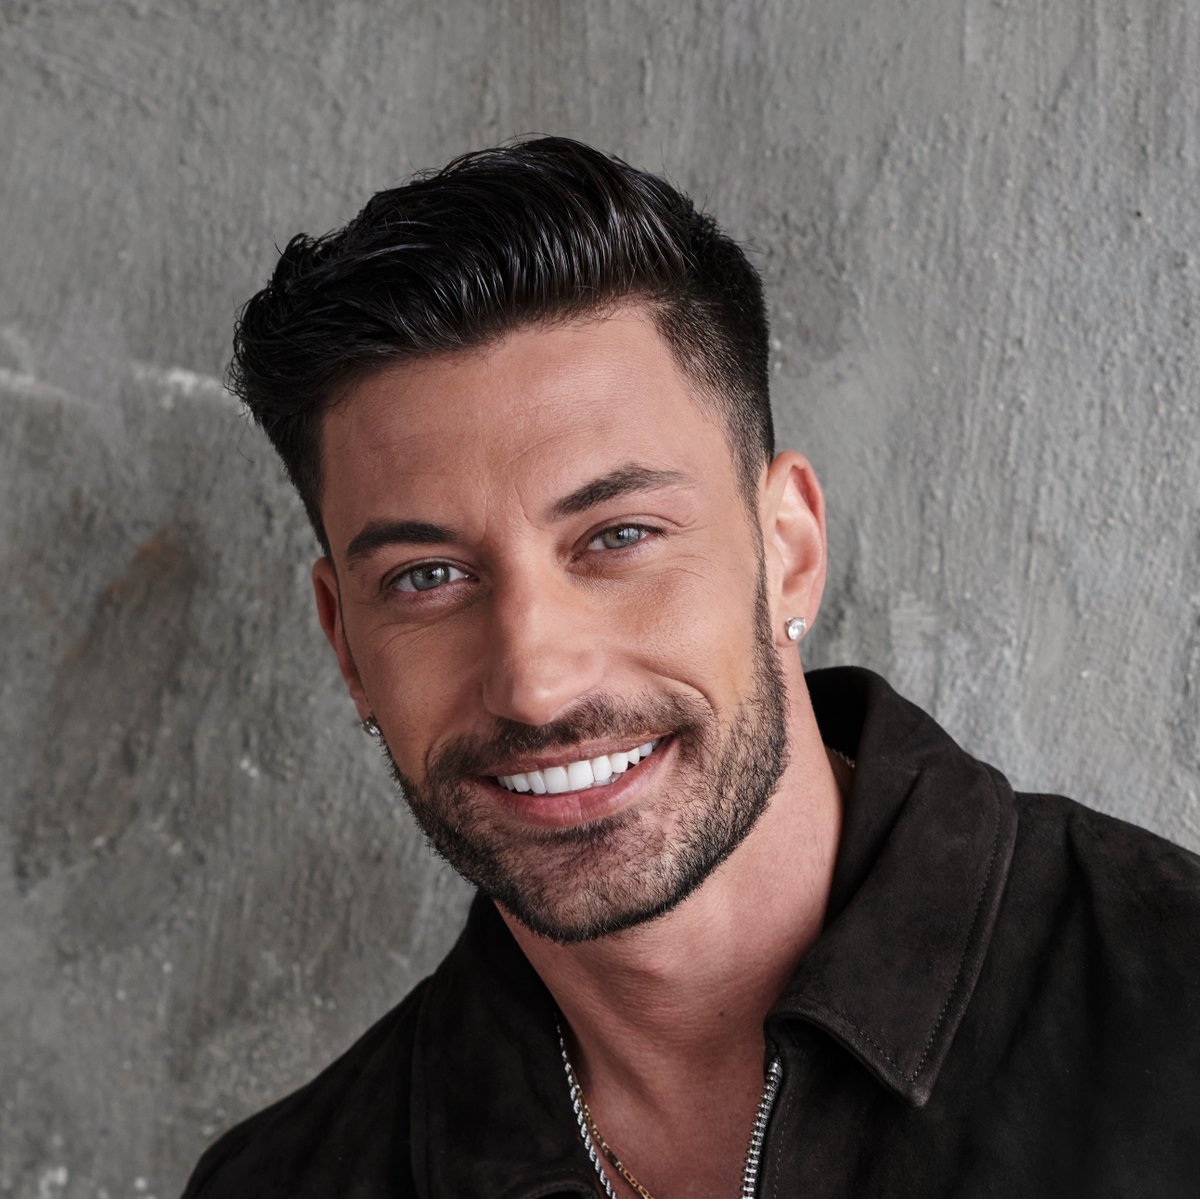 TOGETHER AGAIN! Our GIOVANNI PERNICE (@pernicegiovann1) will be embarking on a new tour with Anton in 'Anton and Giovanni: Together - The Live Tour'! The tour opens on June 14th and will tour the UK so grab your tickets at antonandgiovanni.com/2024-tickets @Stheatreco #GBA #Giovanni